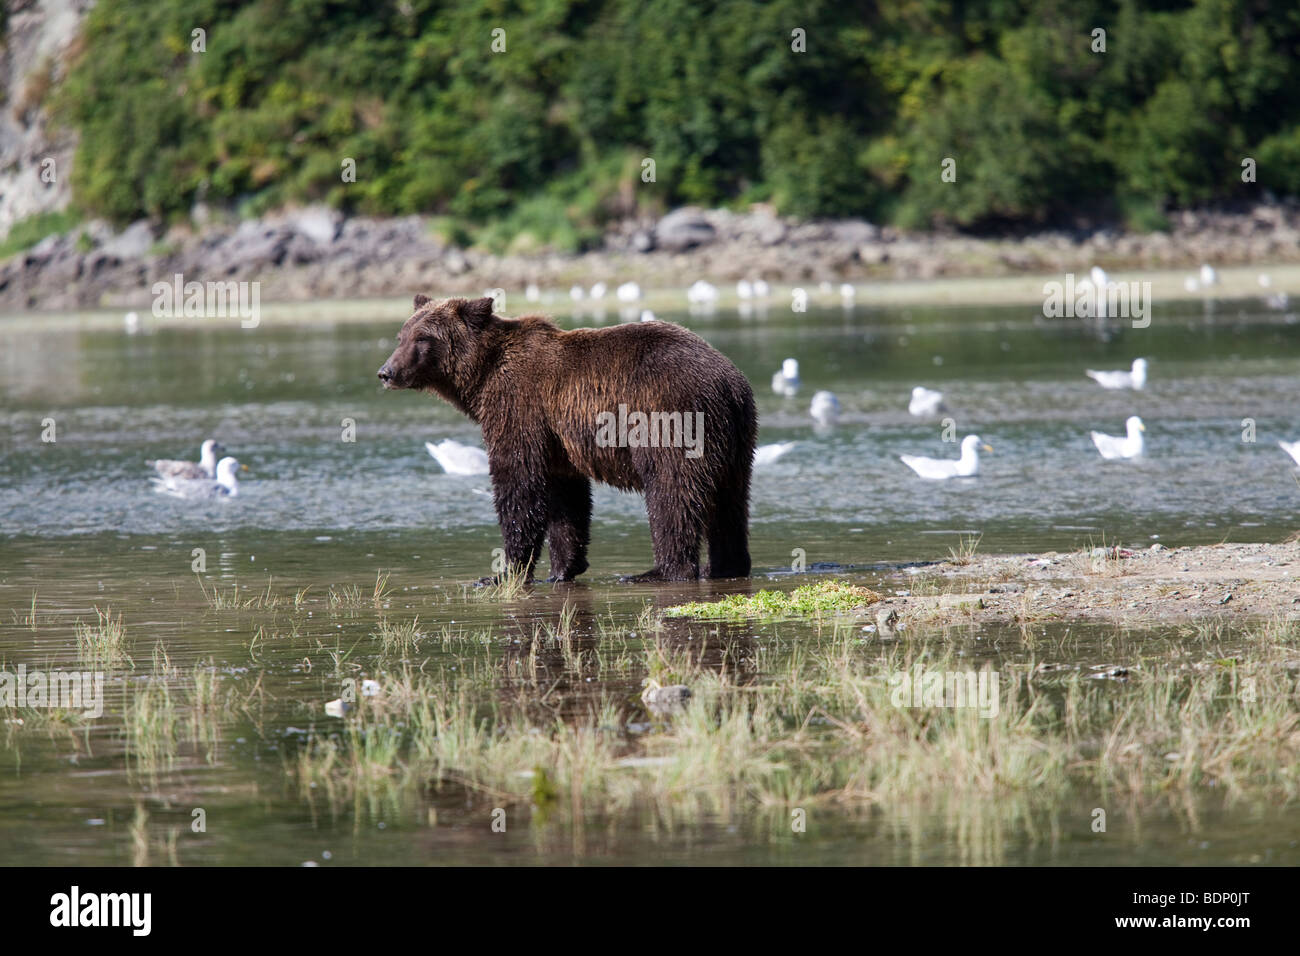 Grizzly bear standing in Geographic Bay Katmai Alaska Stock Photo